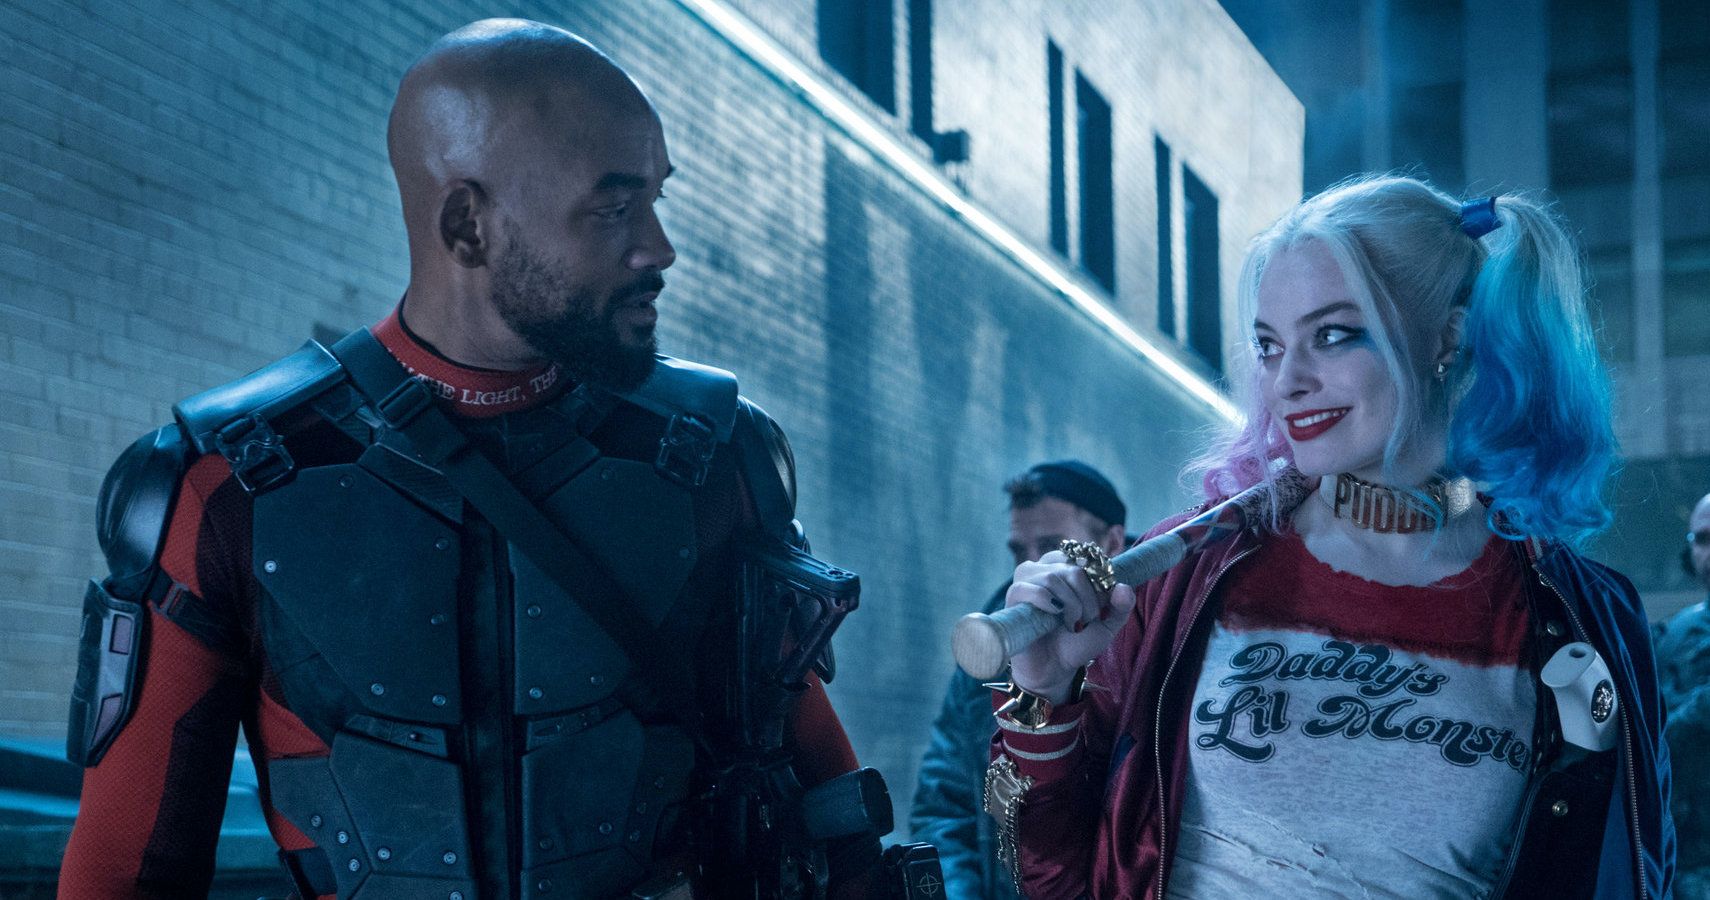 6 Reasons Why Suicide Squad Isn’t As Bad As People Say It Is (& 4 Reasons It Is)